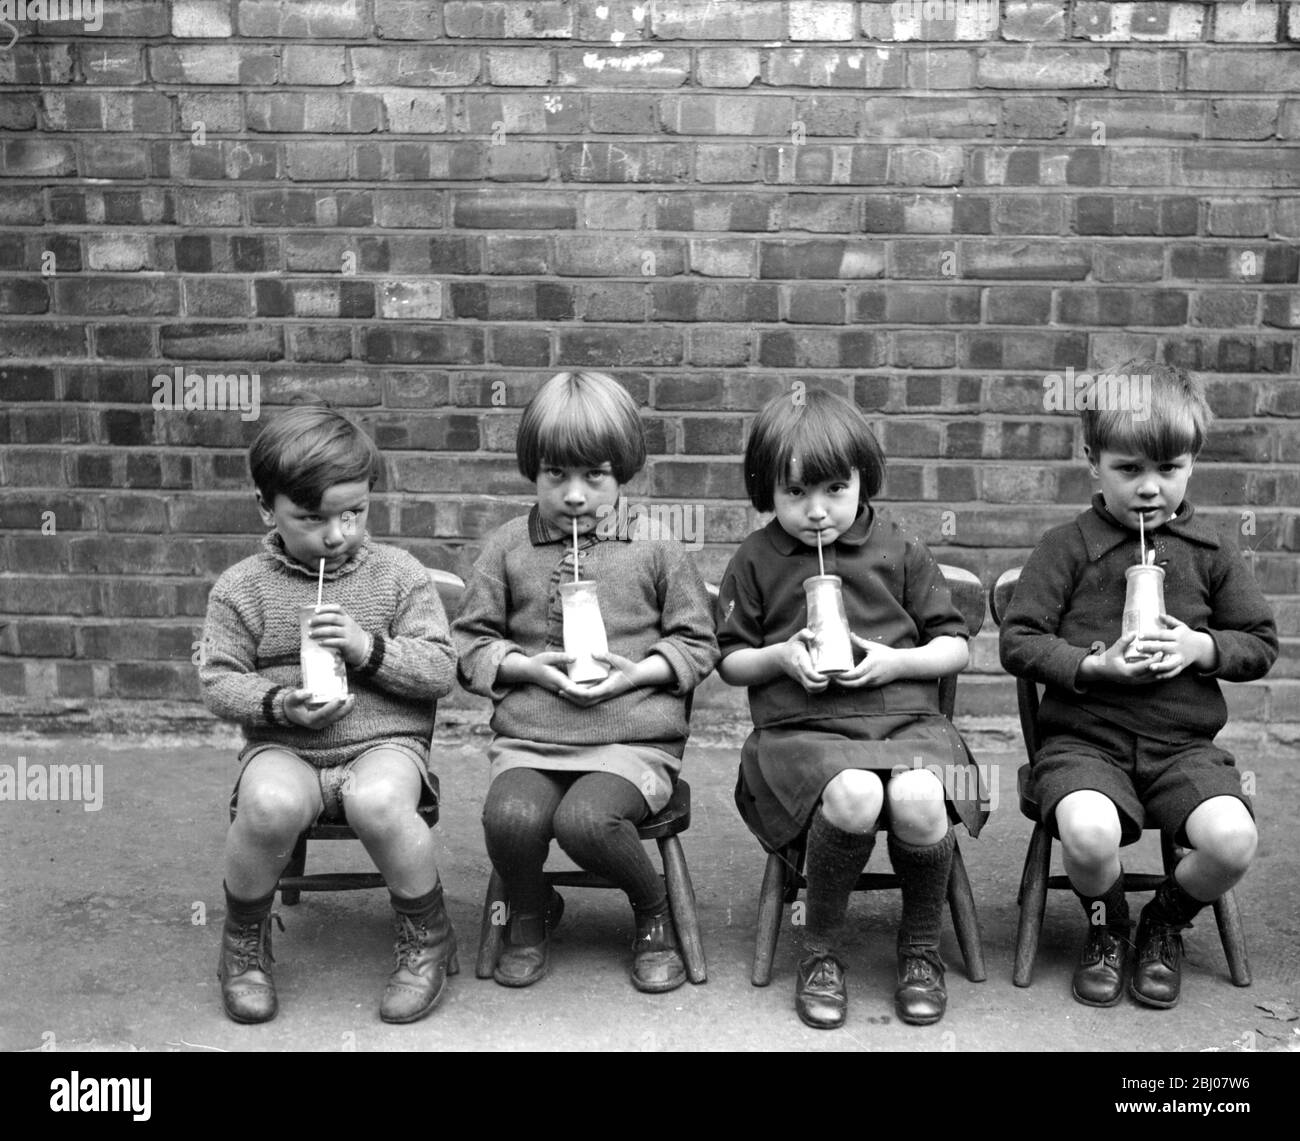 Infant welfare. - For one penny children at Holy Trinity (L.C.C.) school, Lambeth, are provided with a bottle of warmer milk, which they drink by the hygienic use of straws. - 31 October 1929 - - - - - - - - - - - - - - - - - - - - - - - - - - - - - - - - - - - Stock Photo